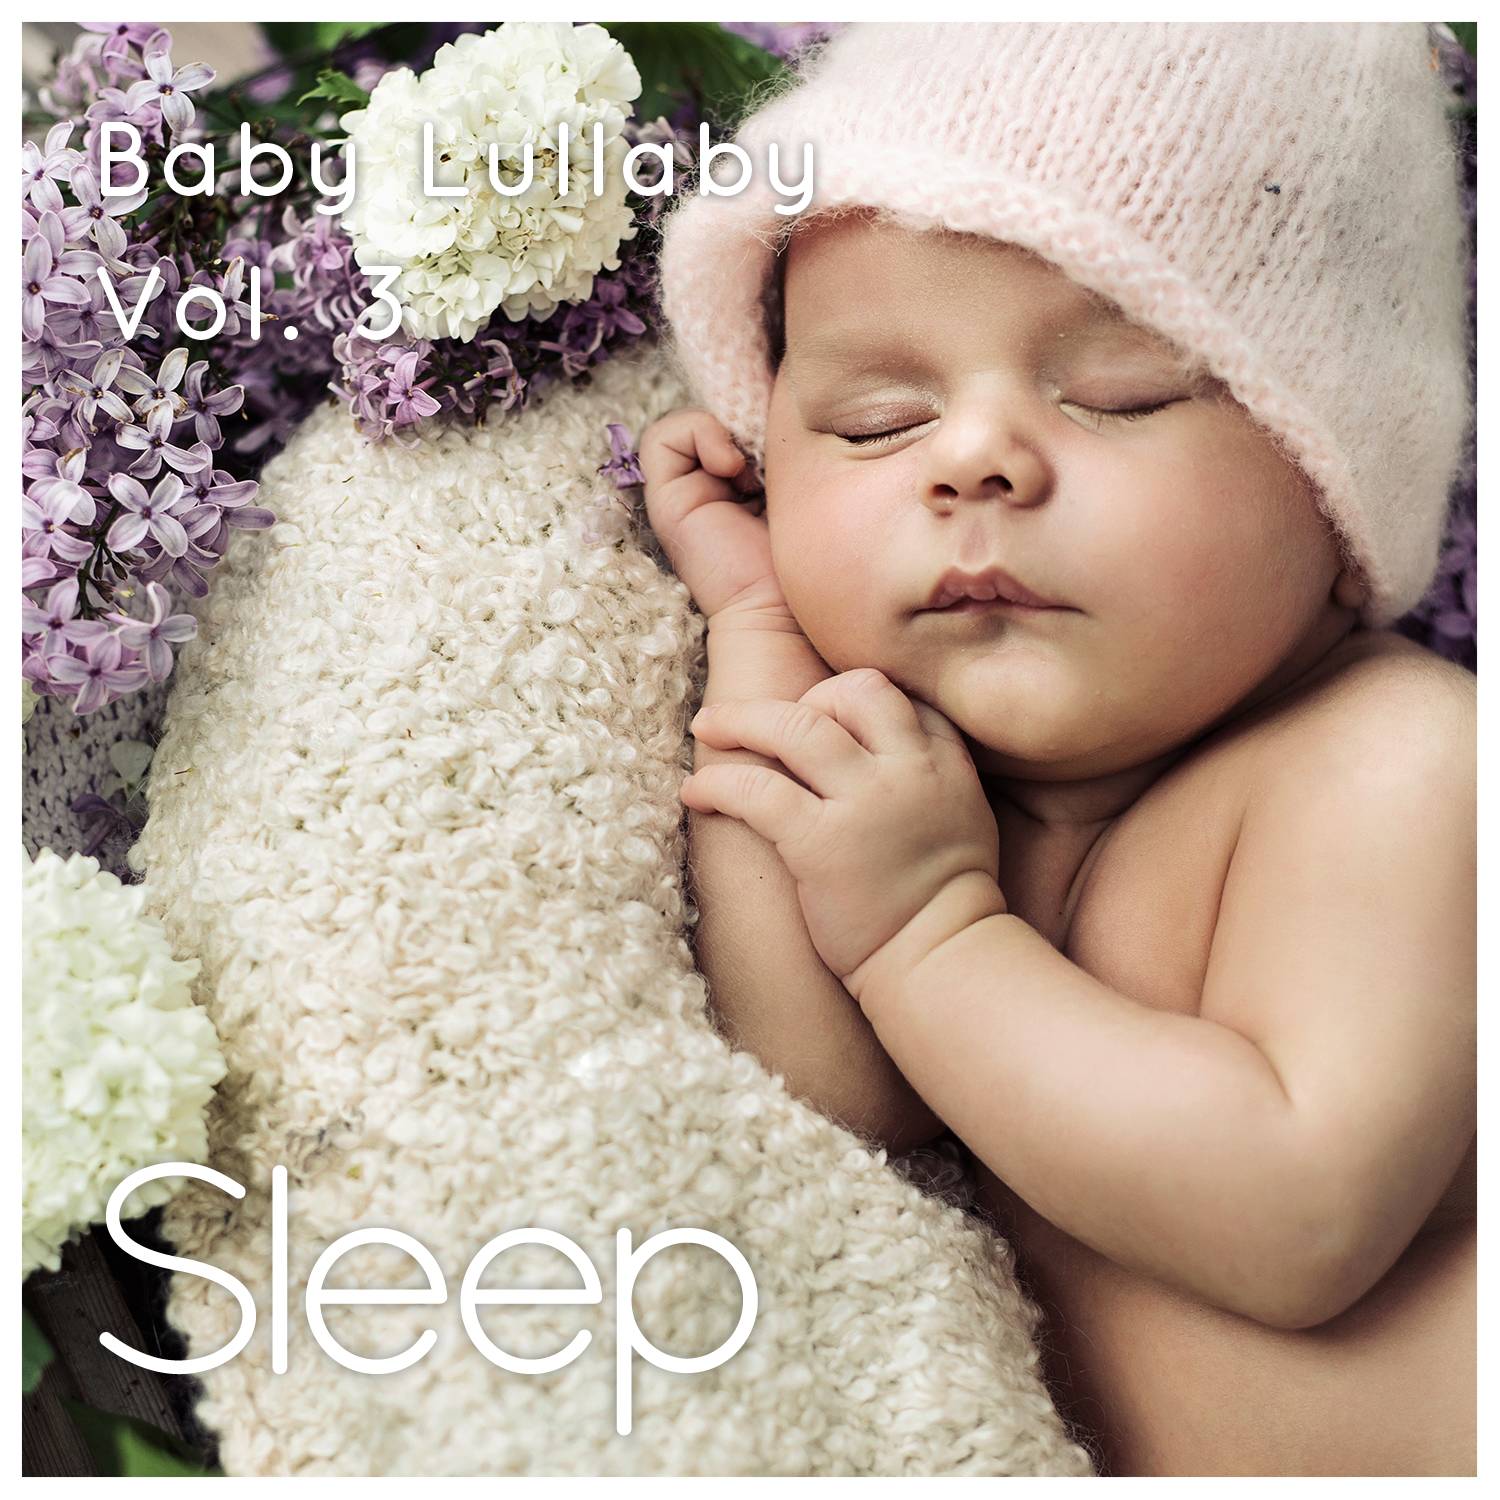 Baby Sleep Ambient Lullaby, Pt. 15